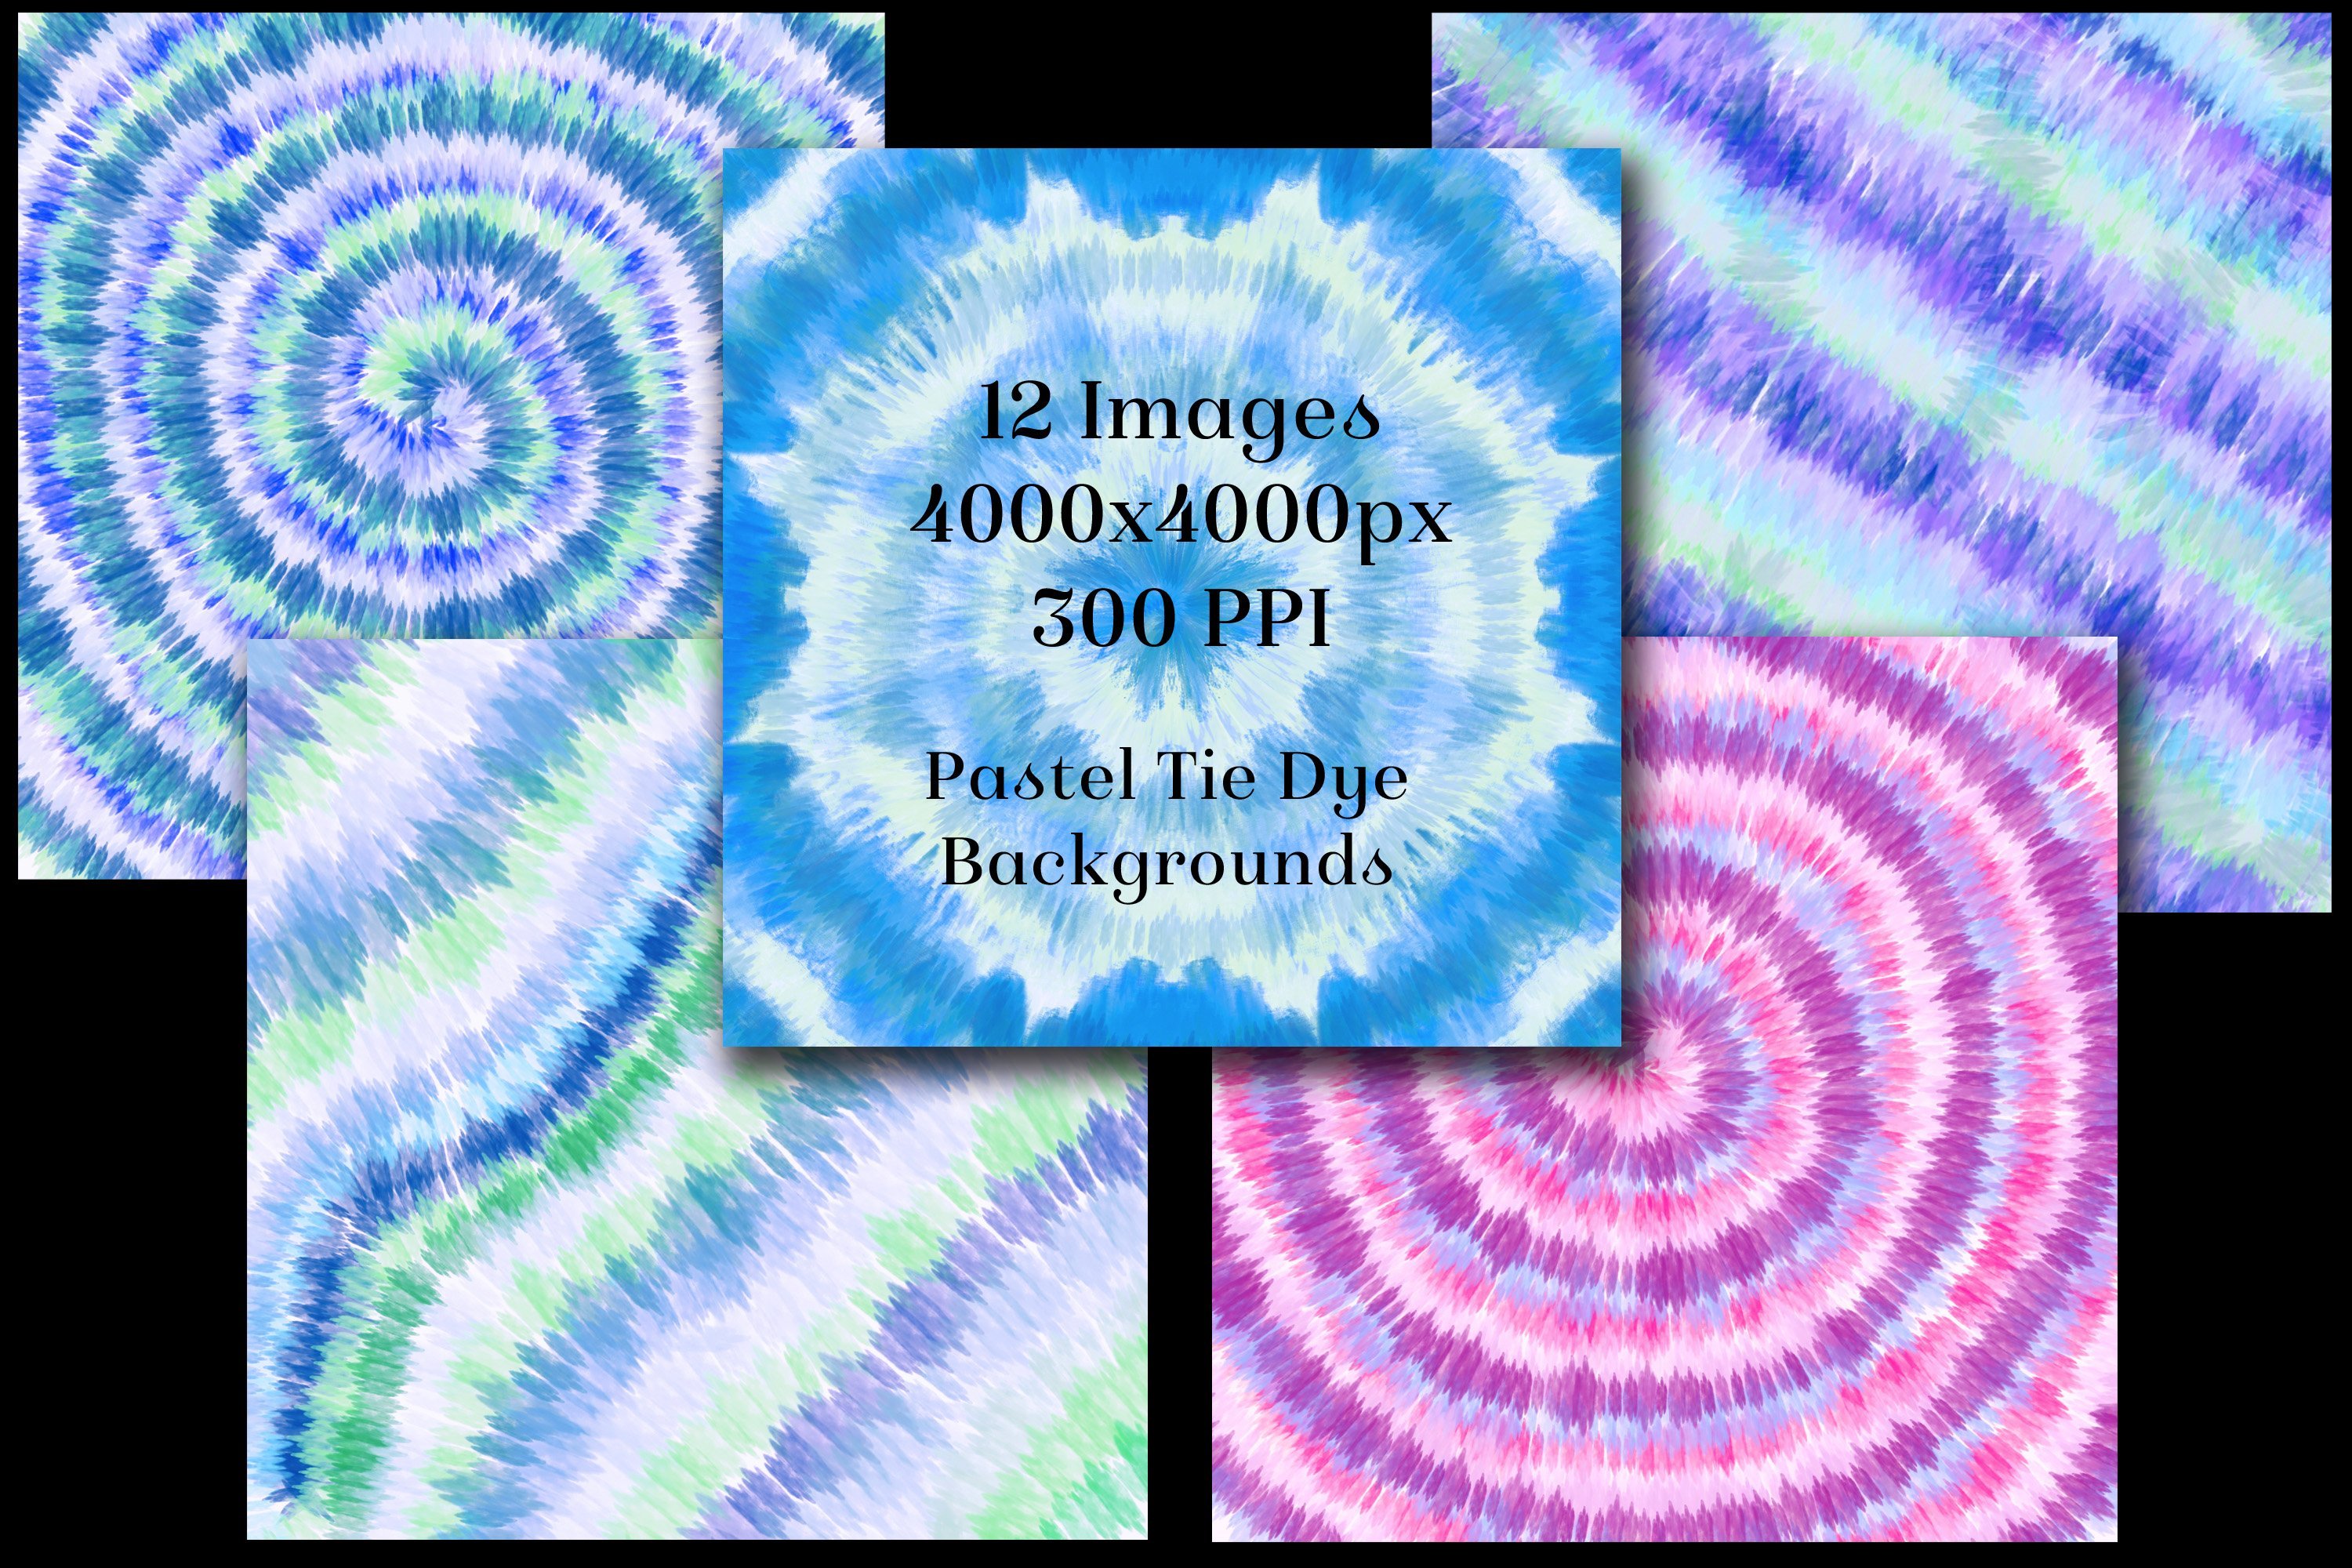 Pastel Tie Dye Backgrounds preview image.